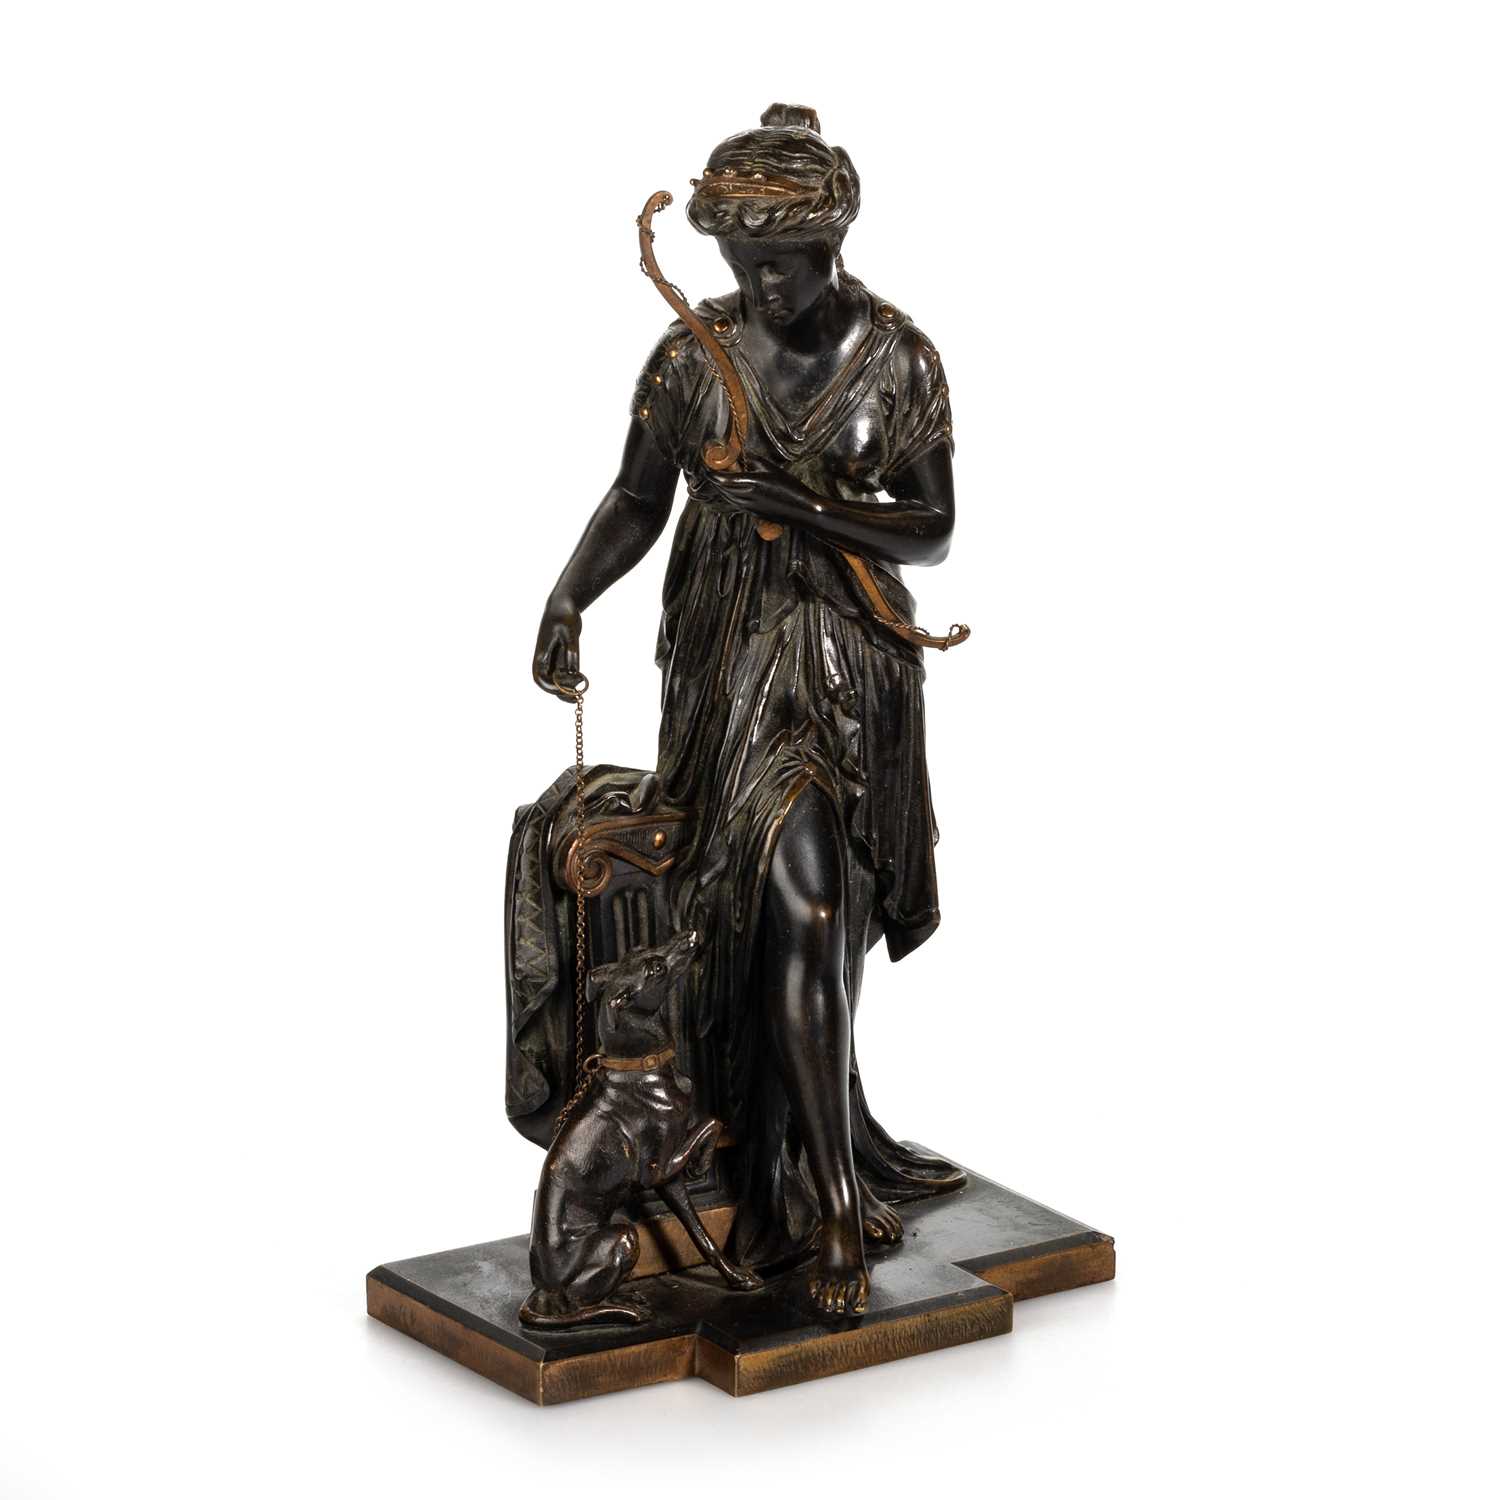 JEAN LOUIS GRÉGOIRE (FRENCH, 1840-1890), DIANA THE HUNTRESS, A BRONZE FIGURE - Image 2 of 3